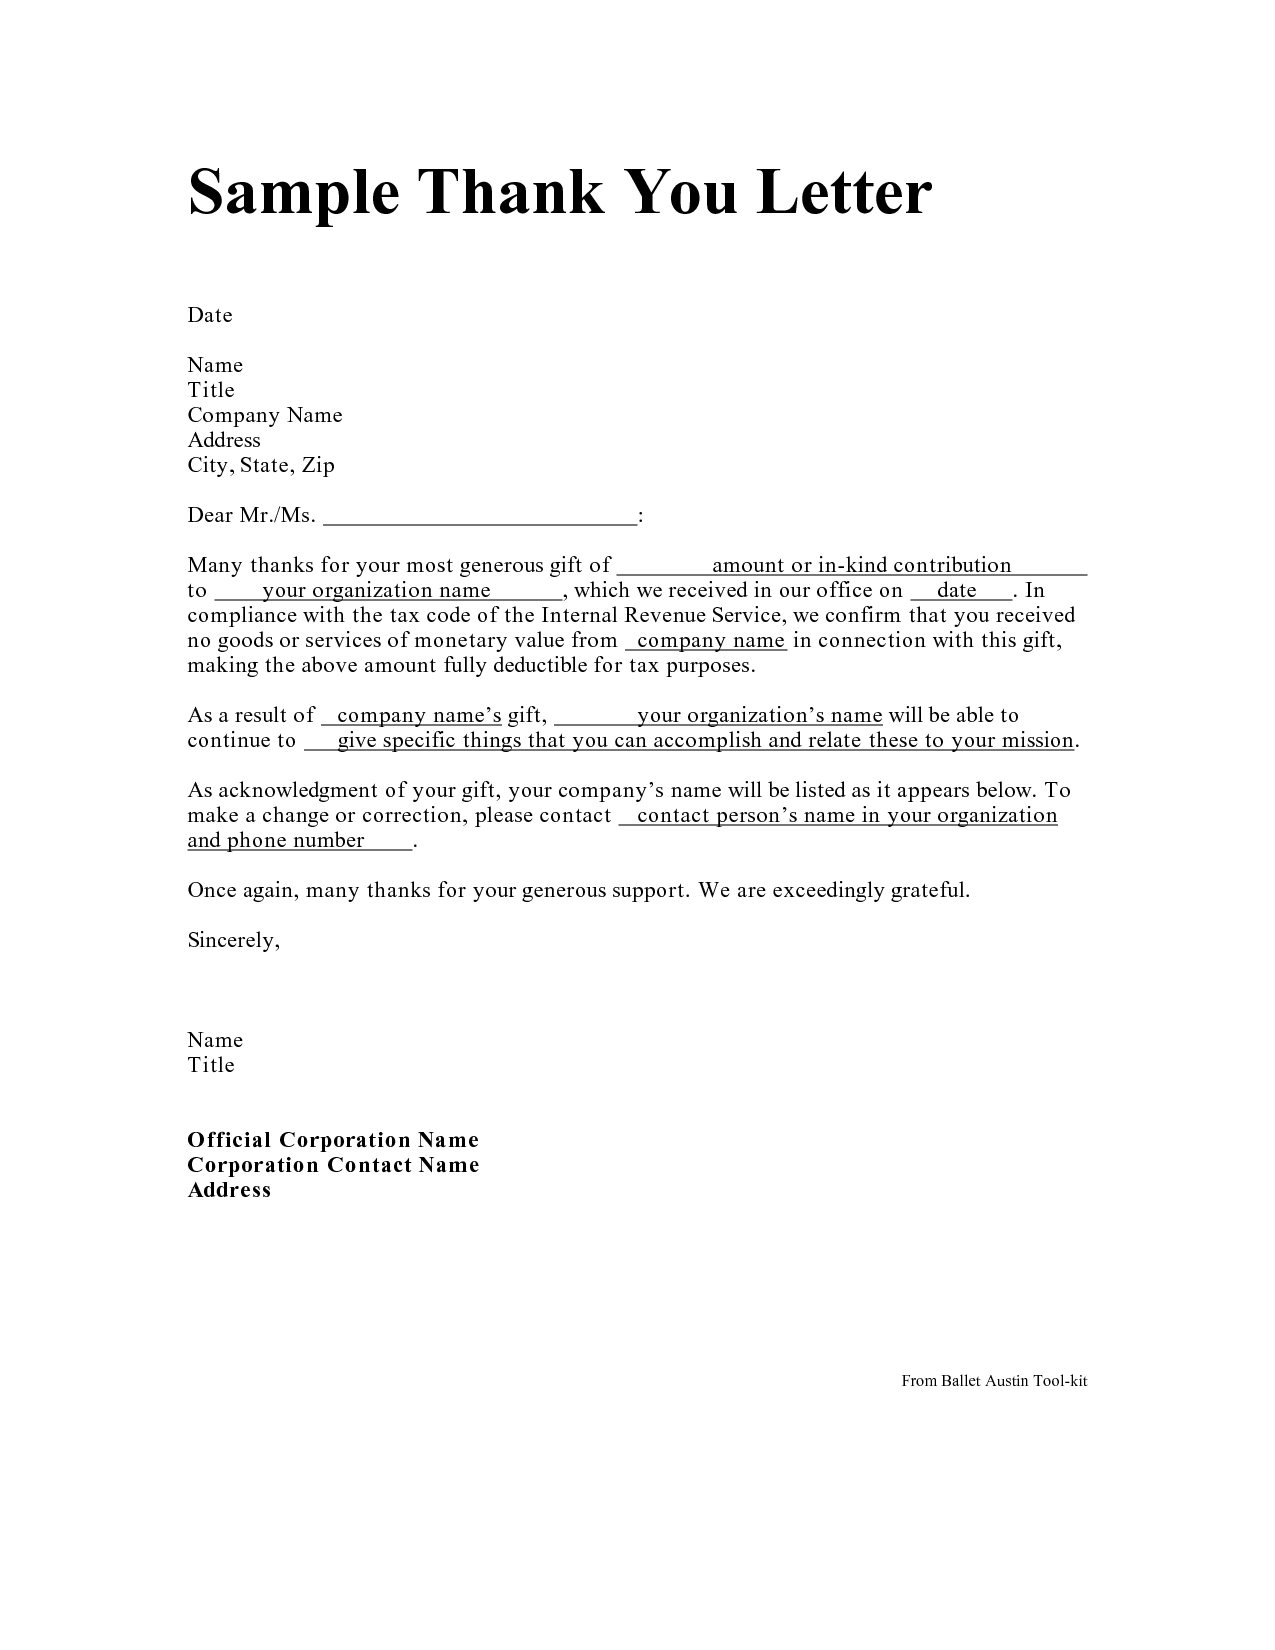 Sample Fundraising Letter Template - Personal Thank You Letter Personal Thank You Letter Samples